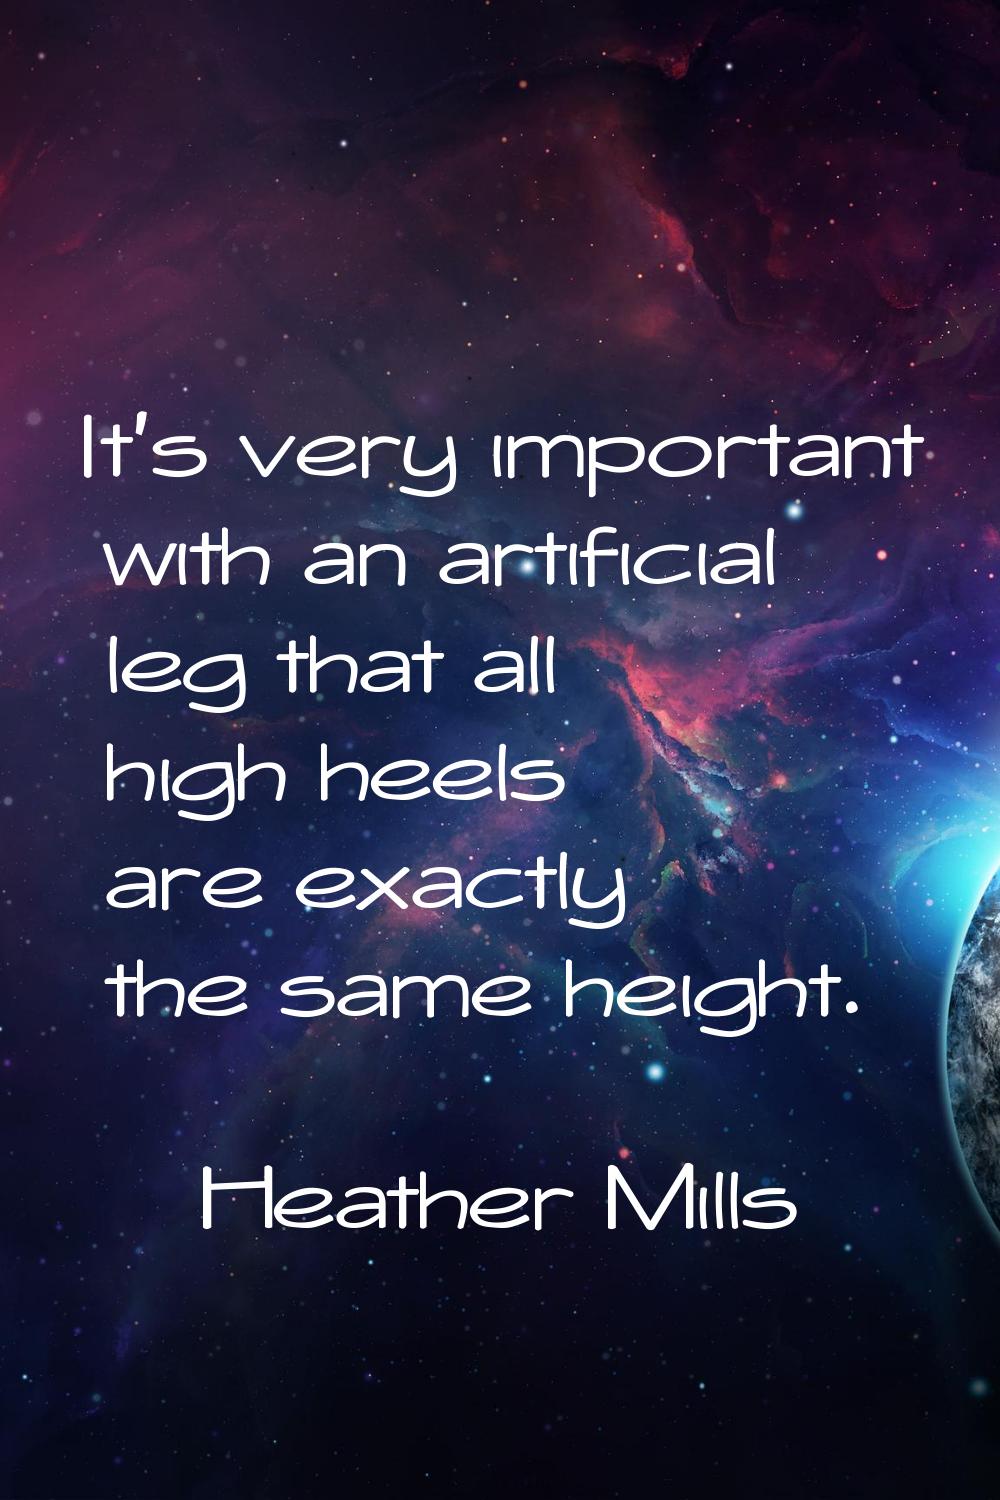 It's very important with an artificial leg that all high heels are exactly the same height.